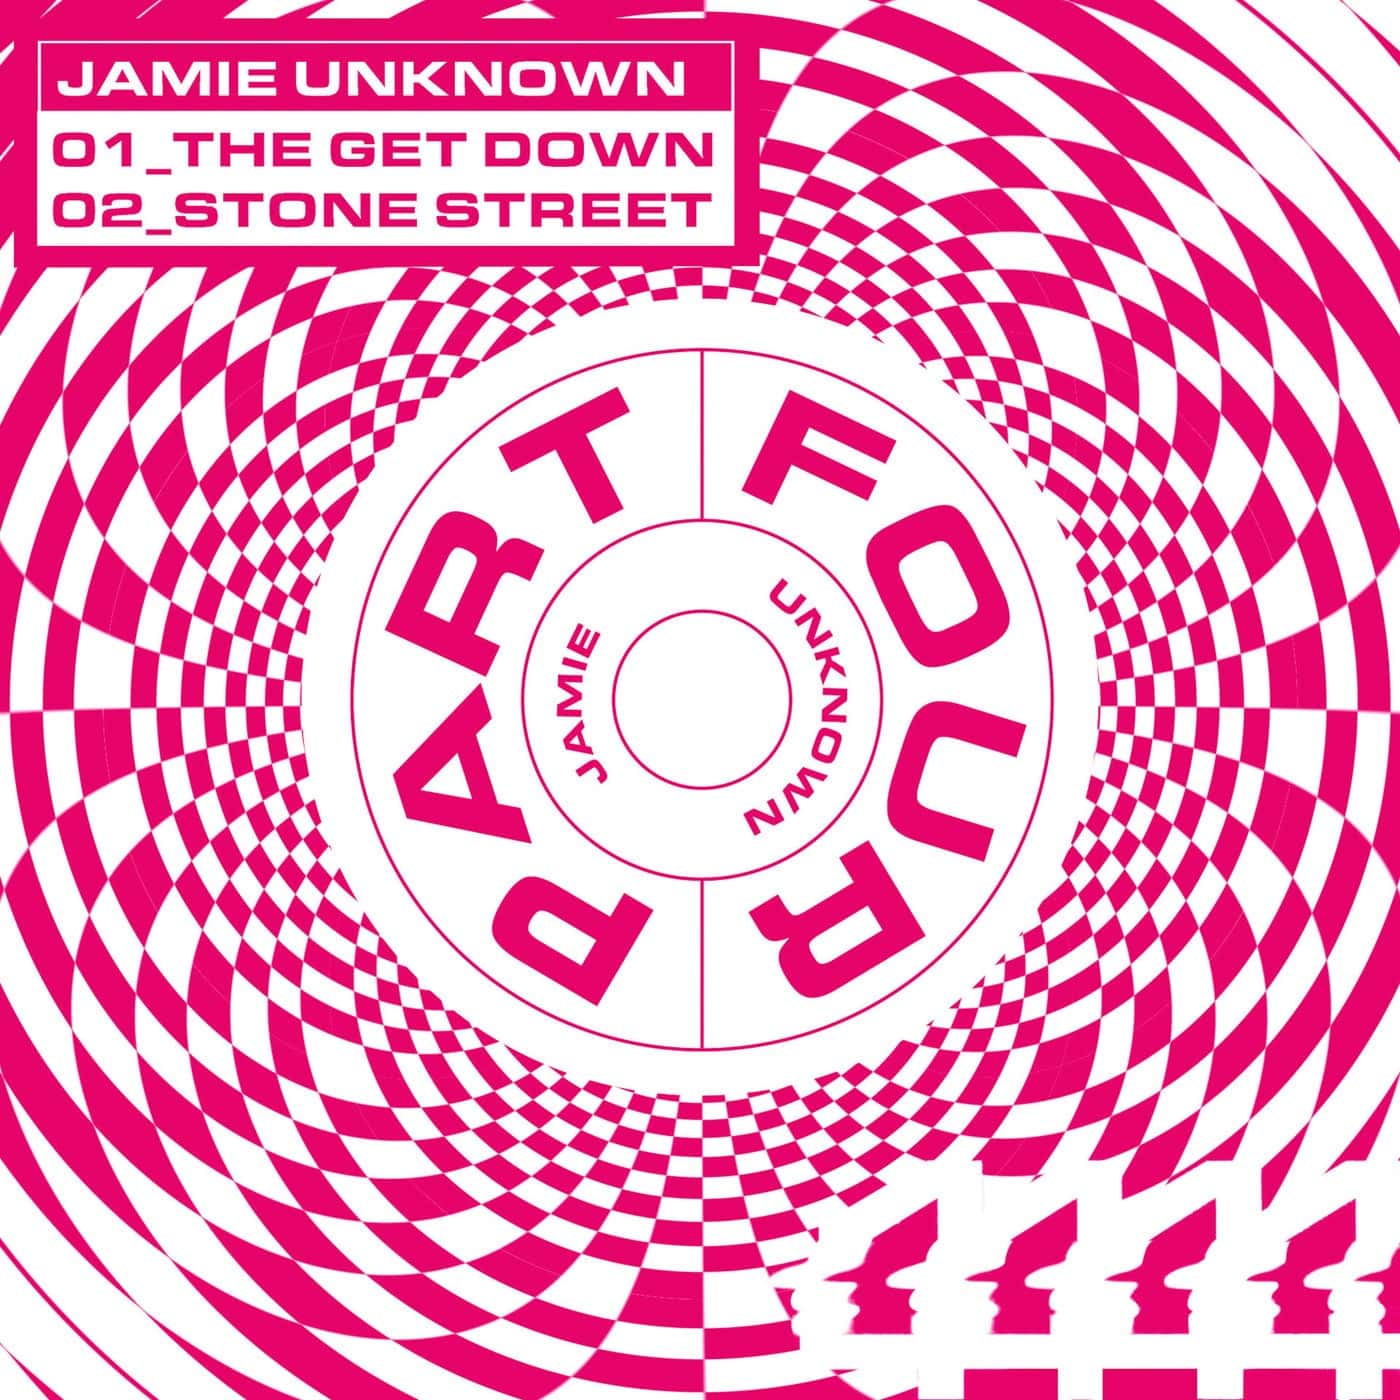 Download Jamie Unknown - The Get Down on Electrobuzz